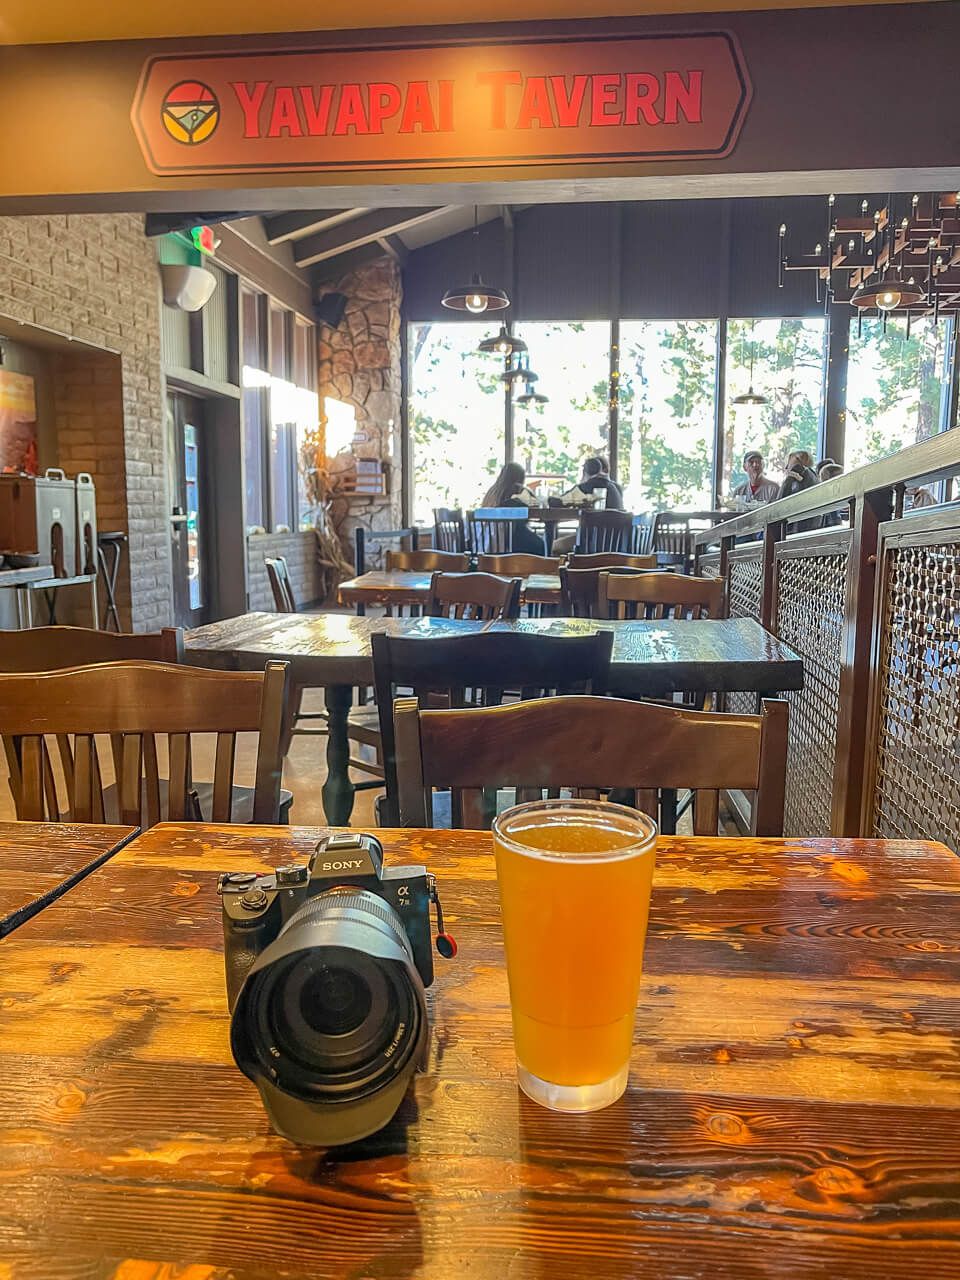 Camera and beer on a table in Yavapai Tavern at Grand Canyon South Rim